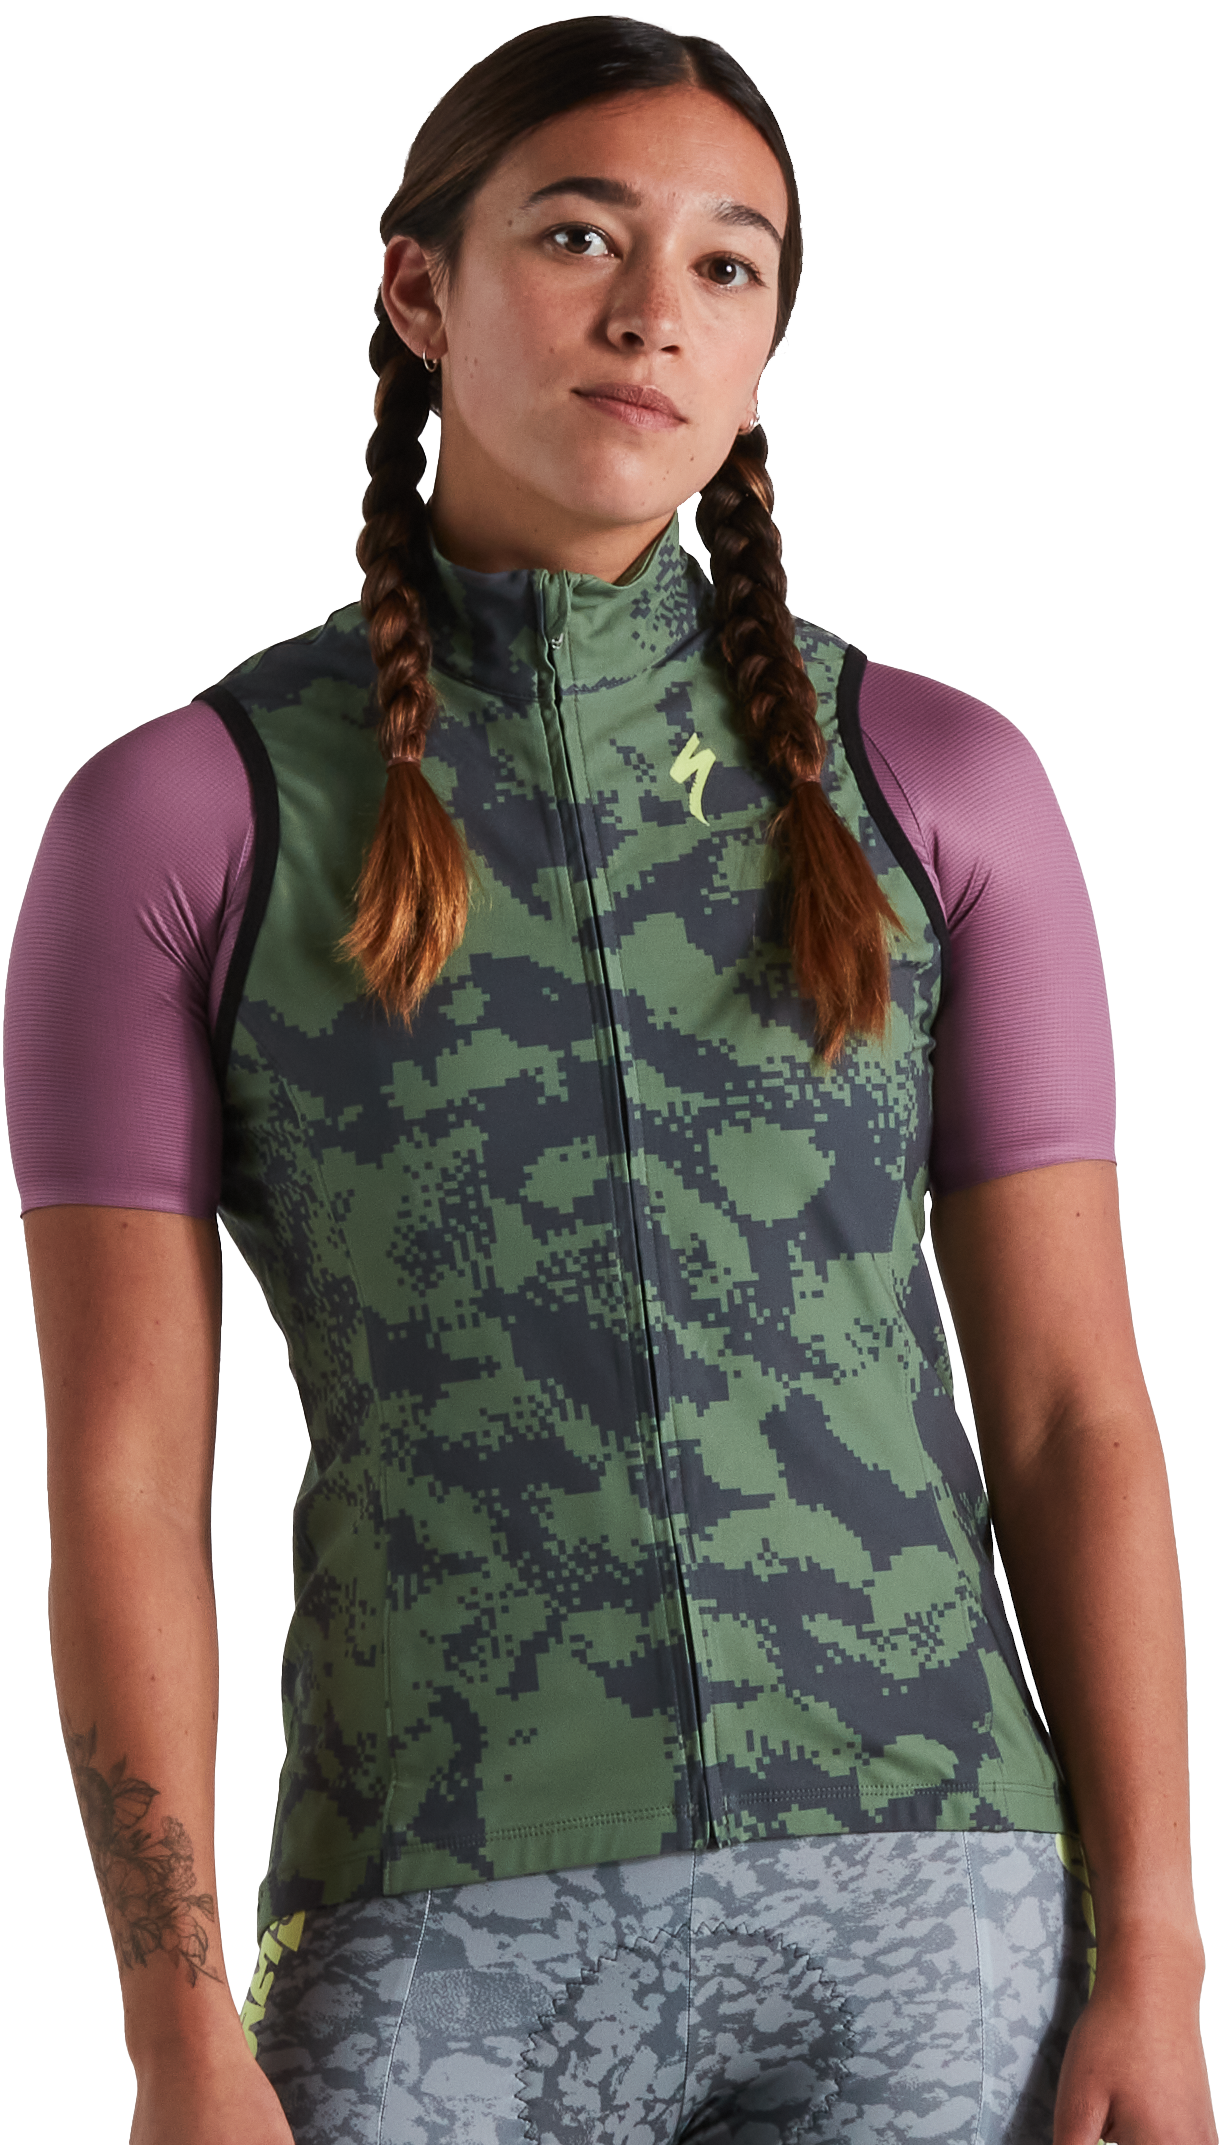 Women's Cycling Jackets & Vests